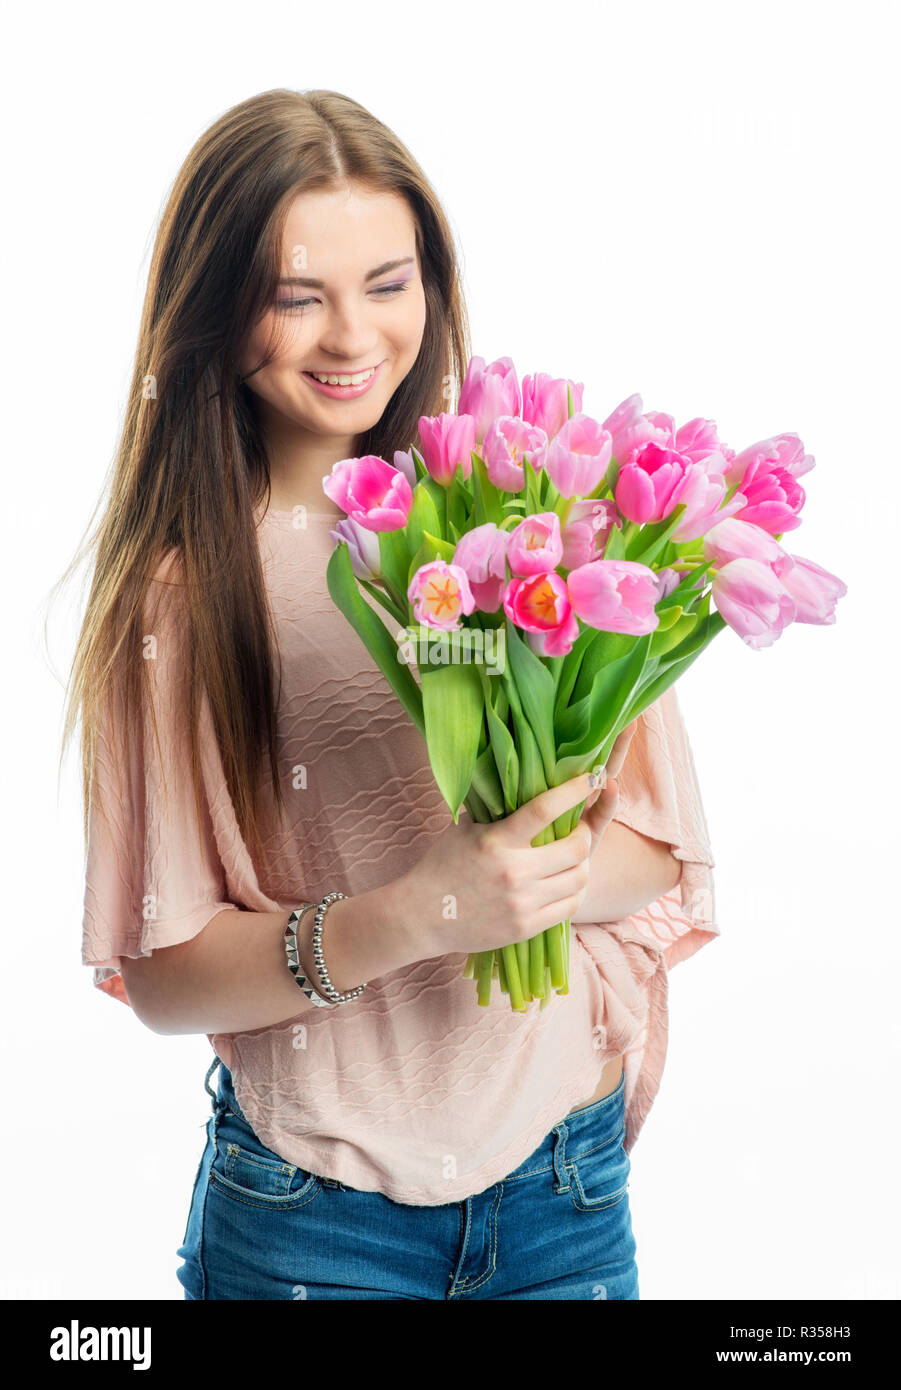 young girl with bouquet Stock Photo